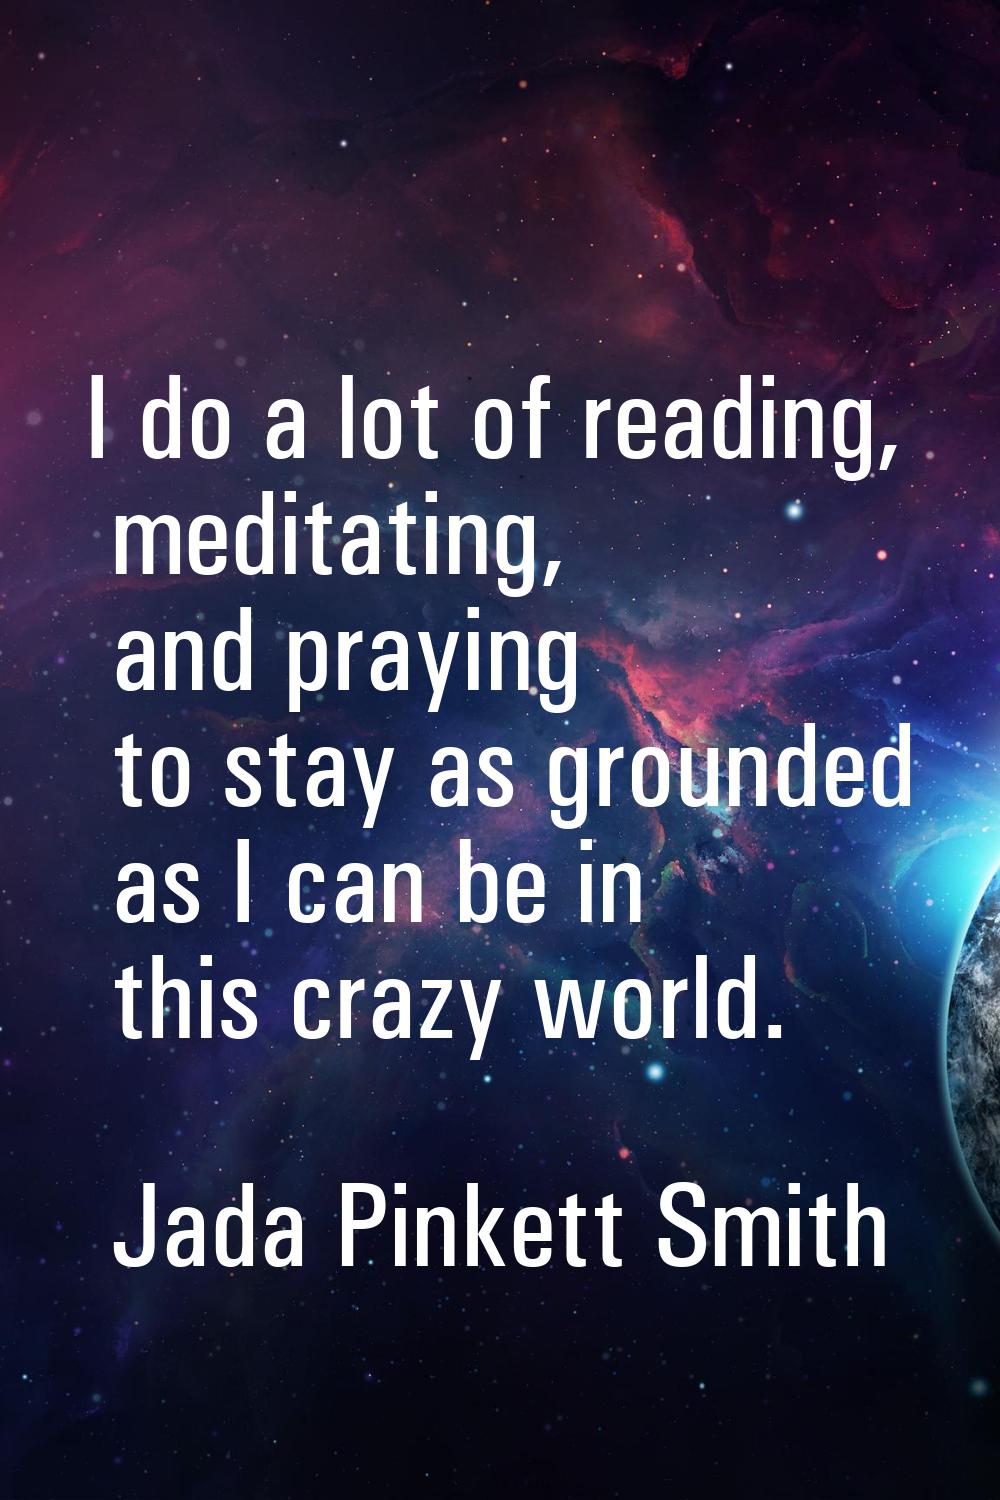 I do a lot of reading, meditating, and praying to stay as grounded as I can be in this crazy world.